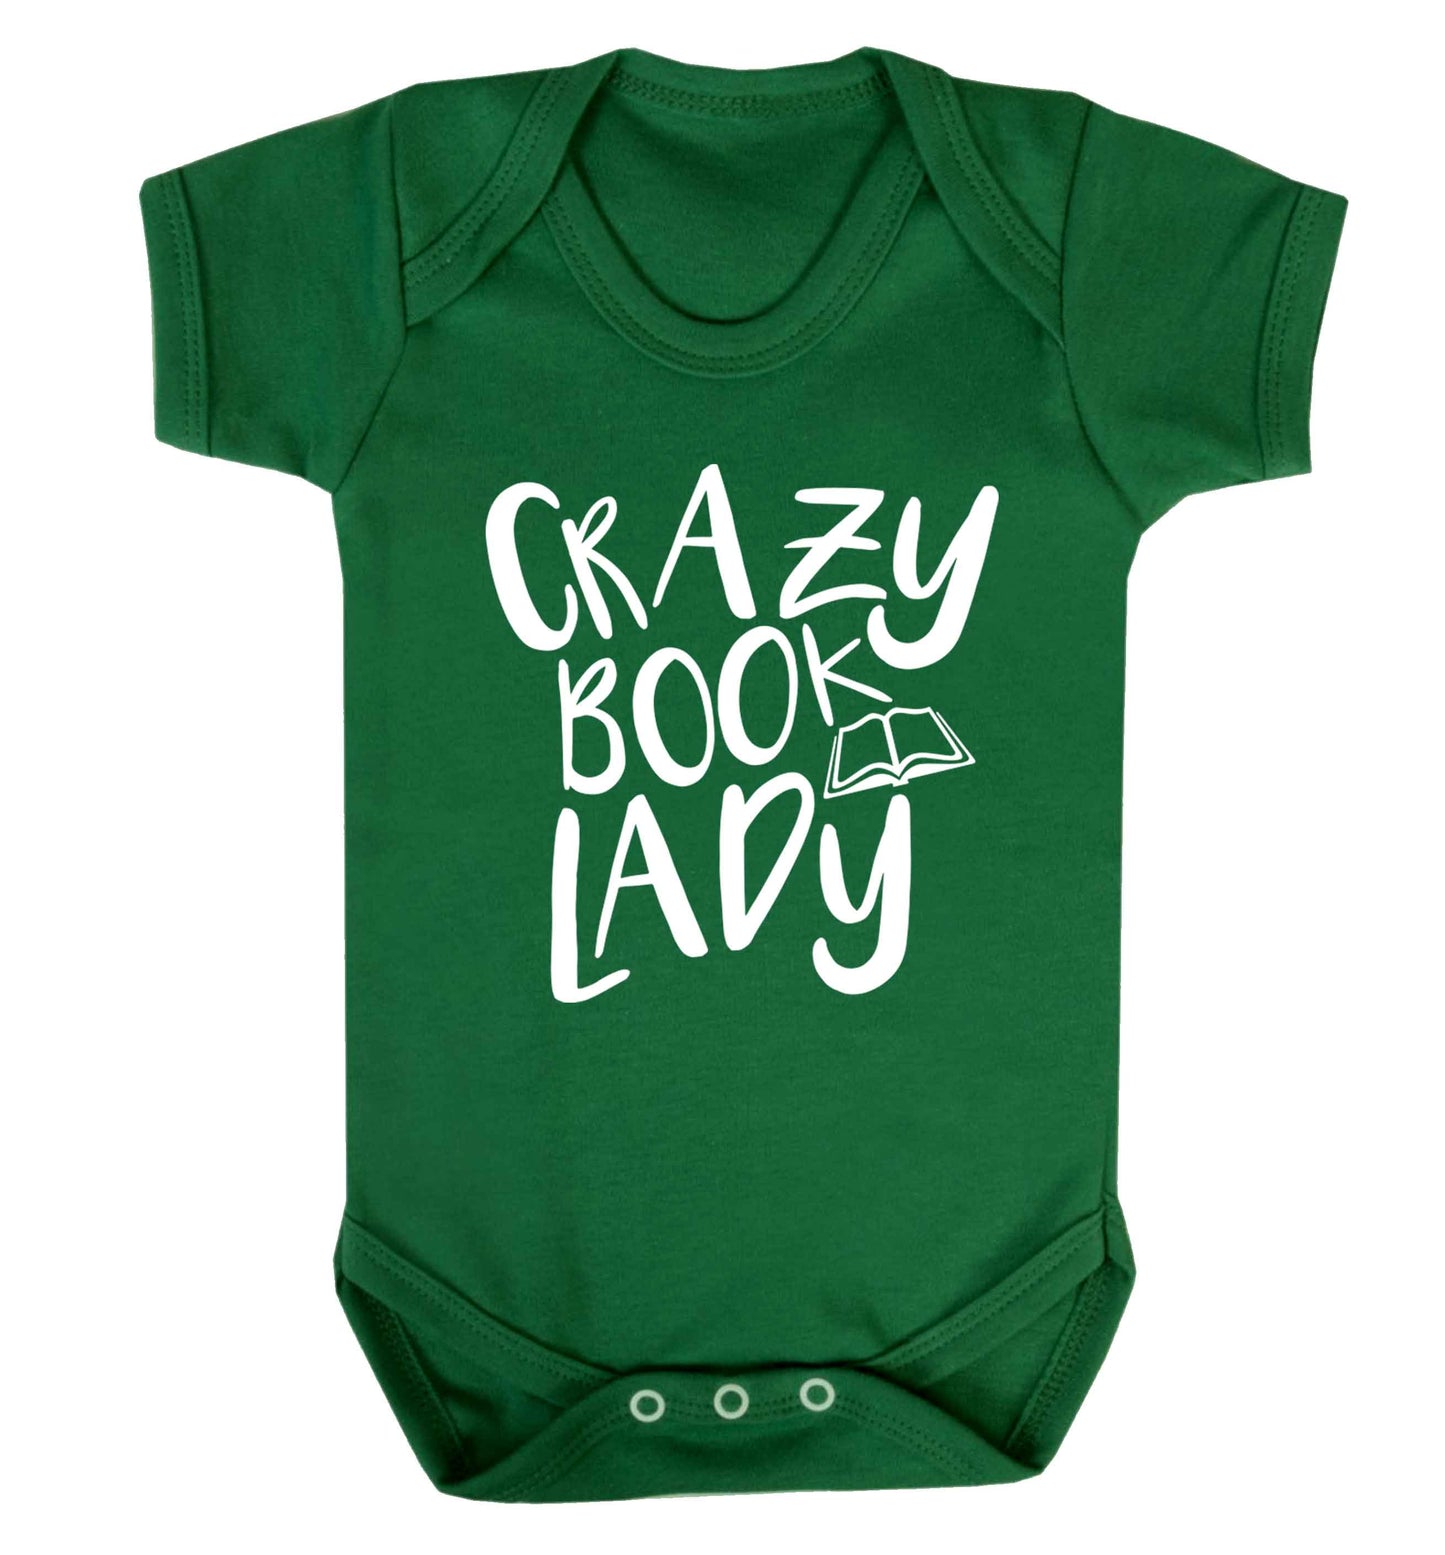 Crazy book lady Baby Vest green 18-24 months